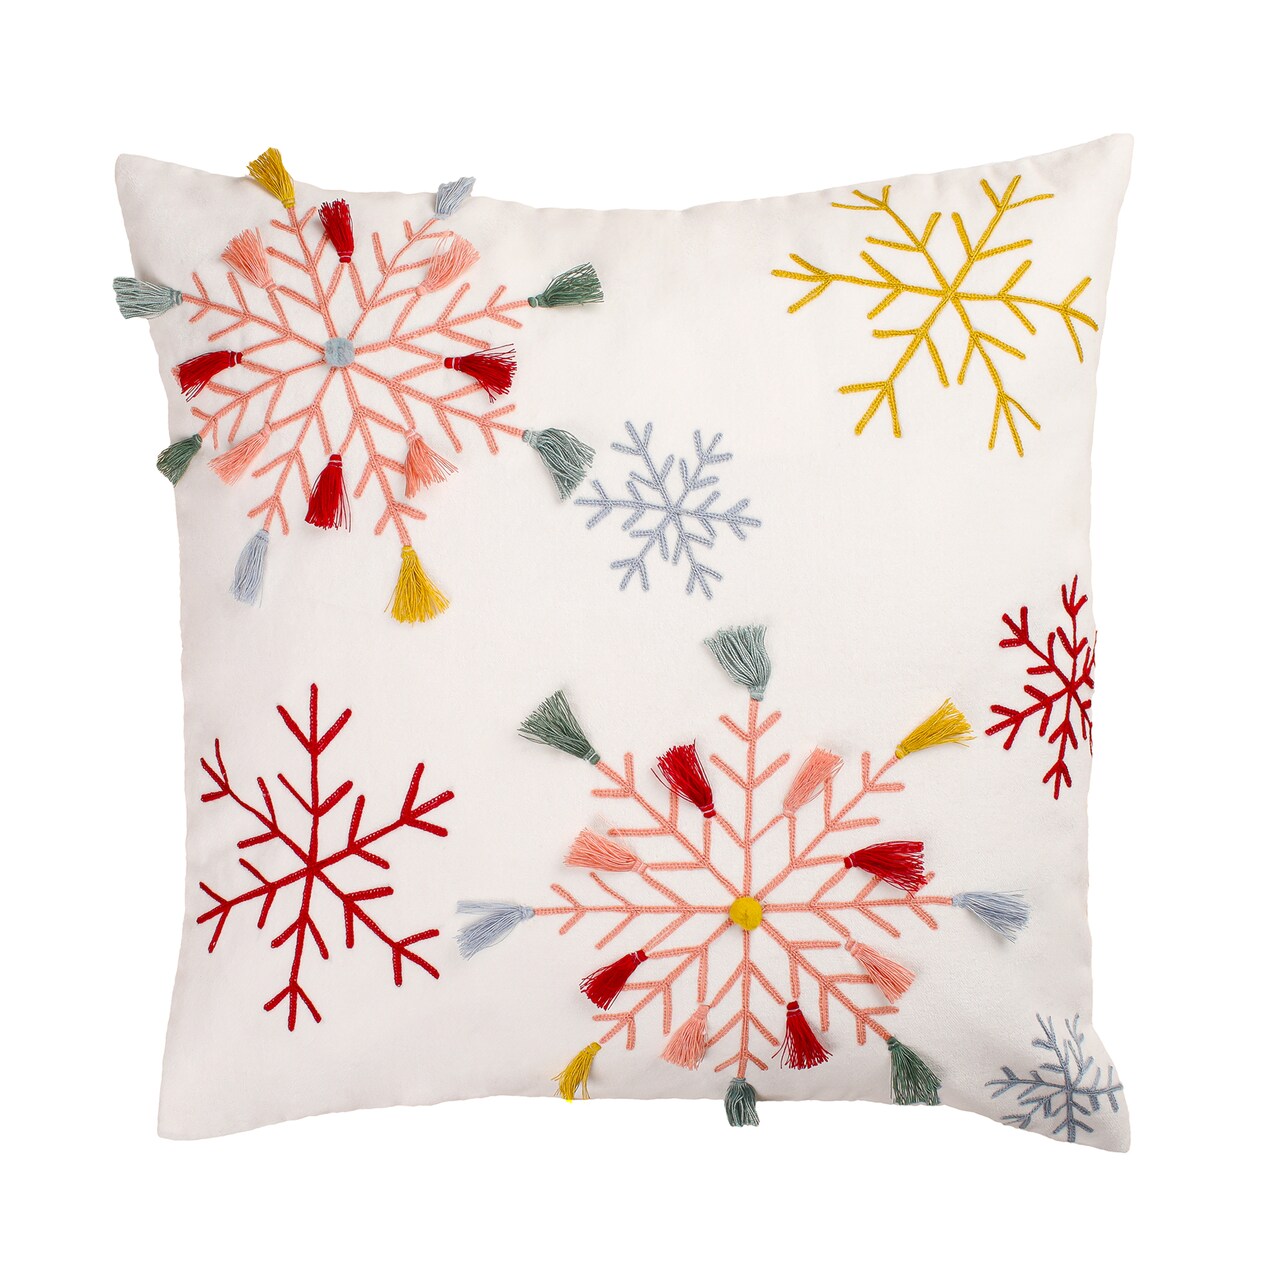 HGTV Home Collection Velvet Snowflake Embroidery Pillow With Polyfill, White, 18 in